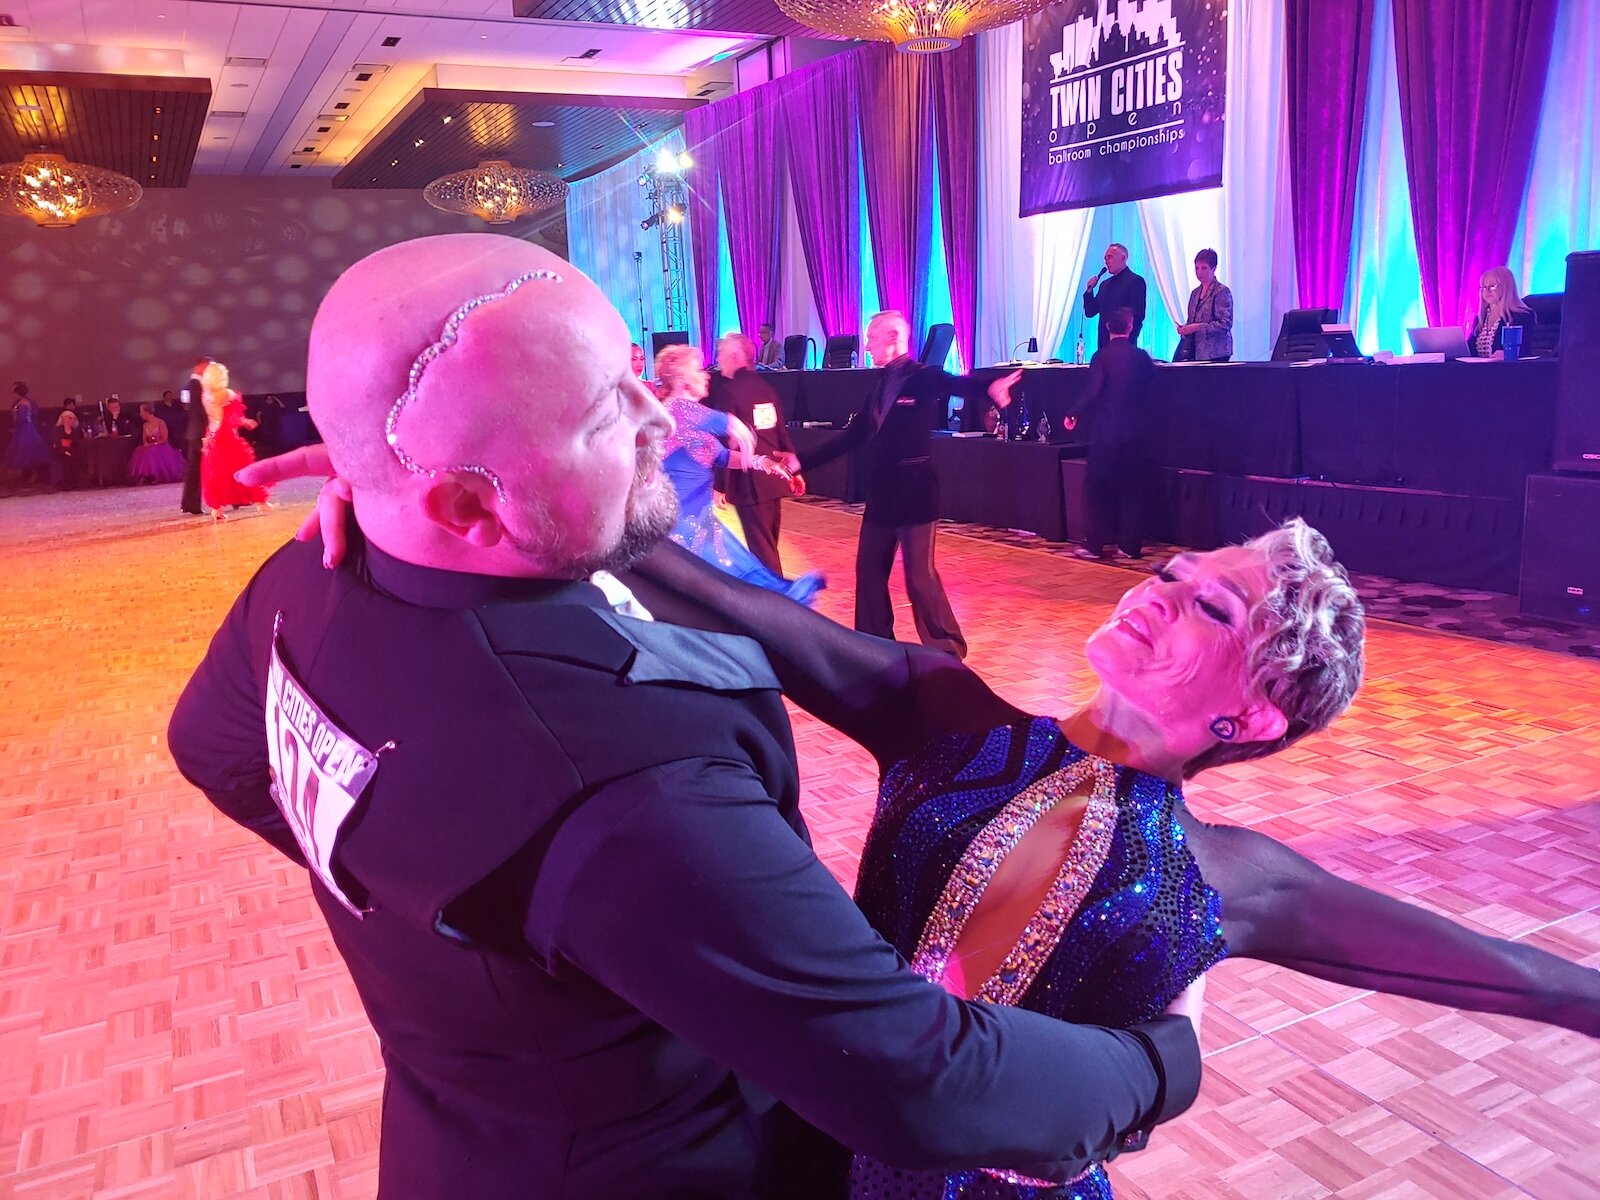 Christopher Spalding, Co-Owner of the Fort Wayne Ballroom Company, shares his remarkable recovery from a cancerous brain tumor bigger than his fist.